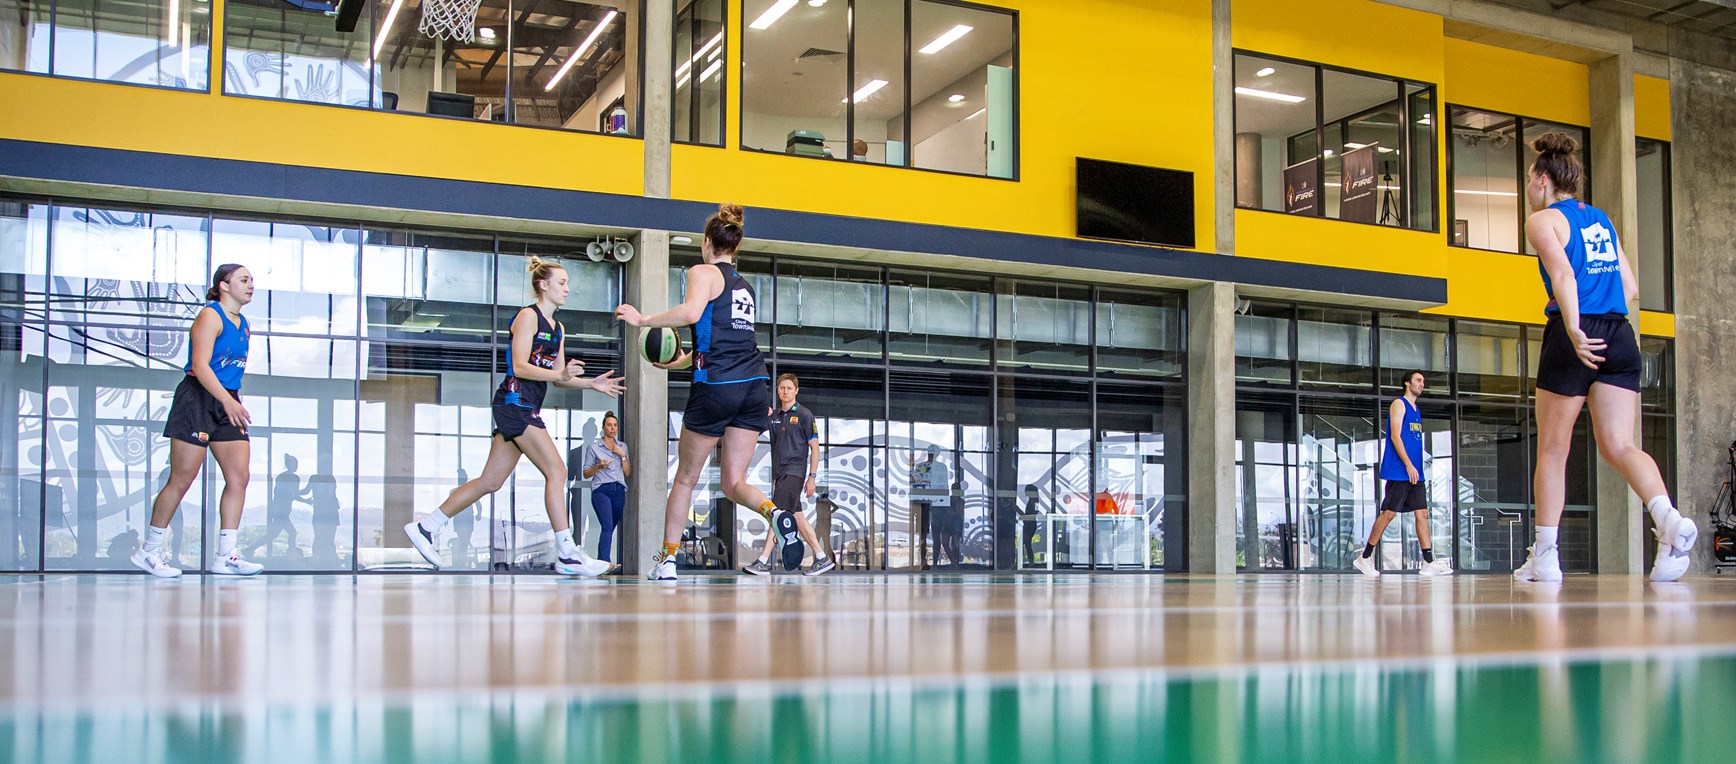 Townsville Fire prepare for WNBL season at Cowboys HQ